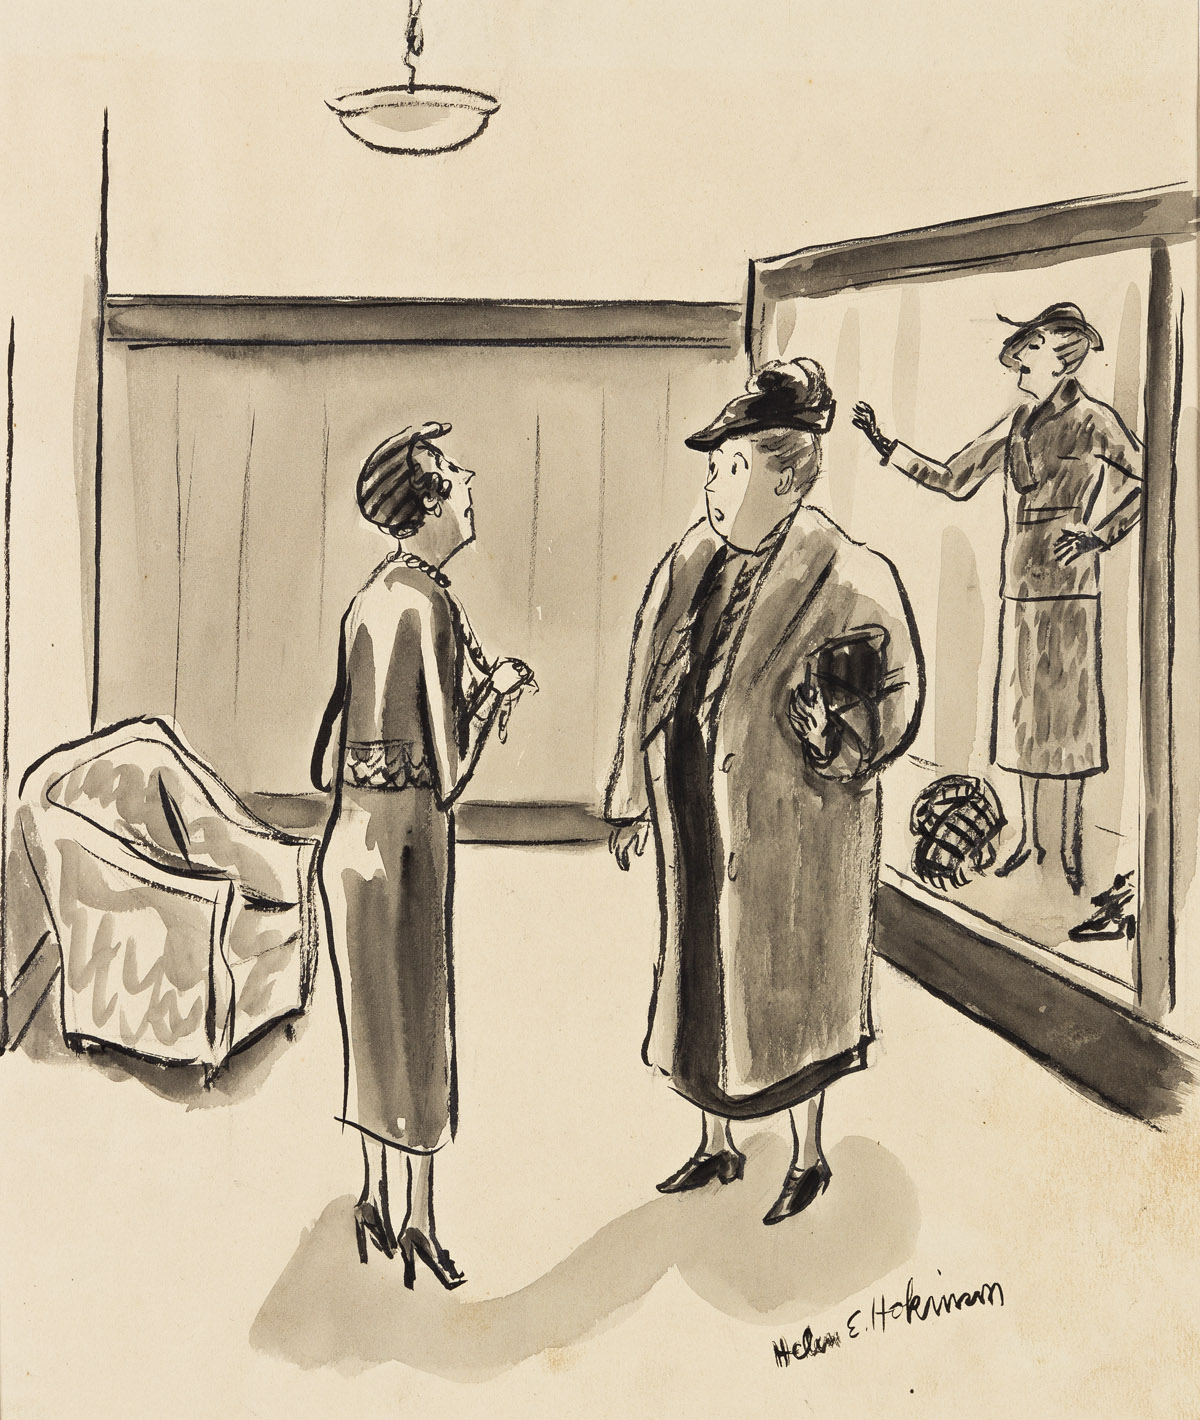 HELEN HOKINSON (1893-1949) I want something that wont show the hairs of a brown dog and a gray cat. [NEW YORKER / CARTOONS]